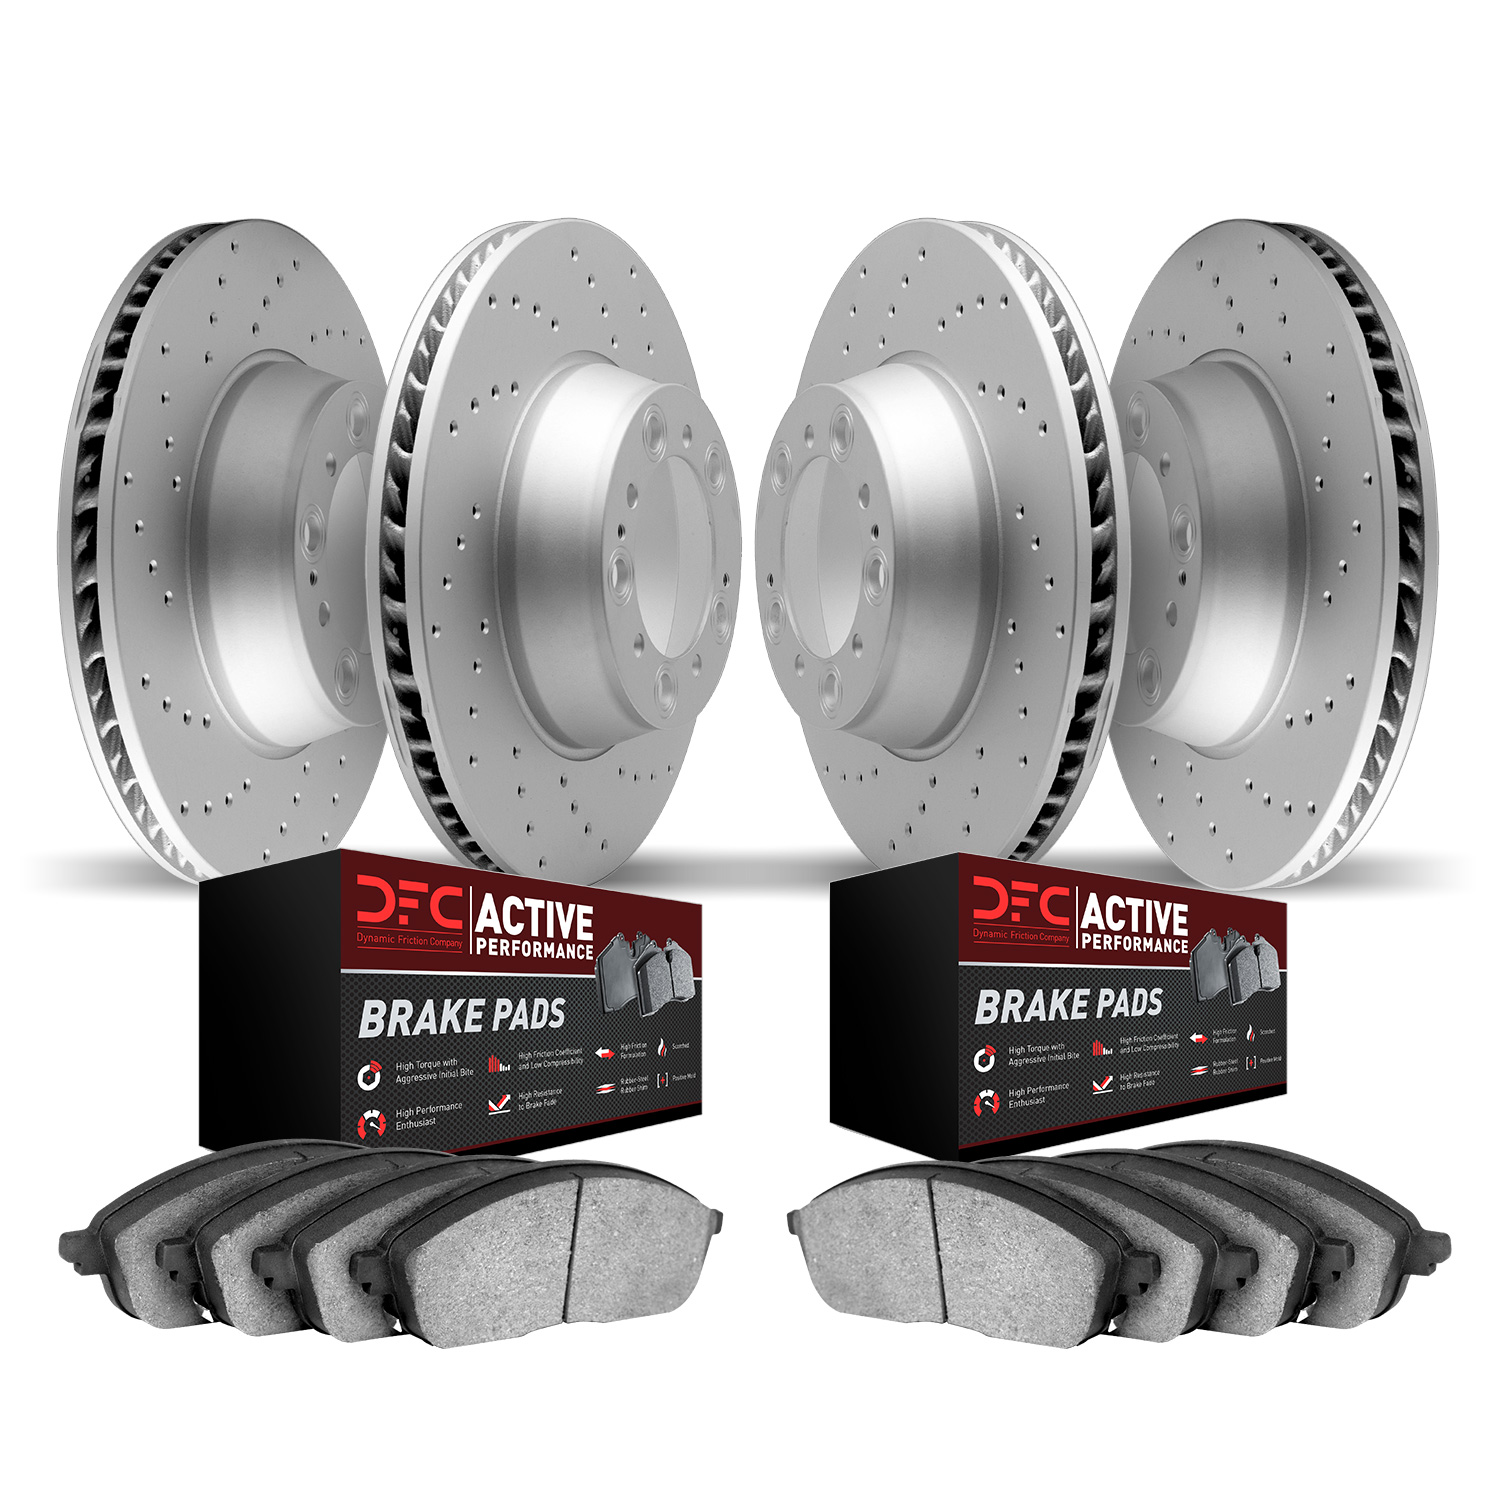 2704-67027 Geoperformance Drilled Brake Rotors with Active Performance Pads Kit, 2003-2004 Infiniti/Nissan, Position: Front and